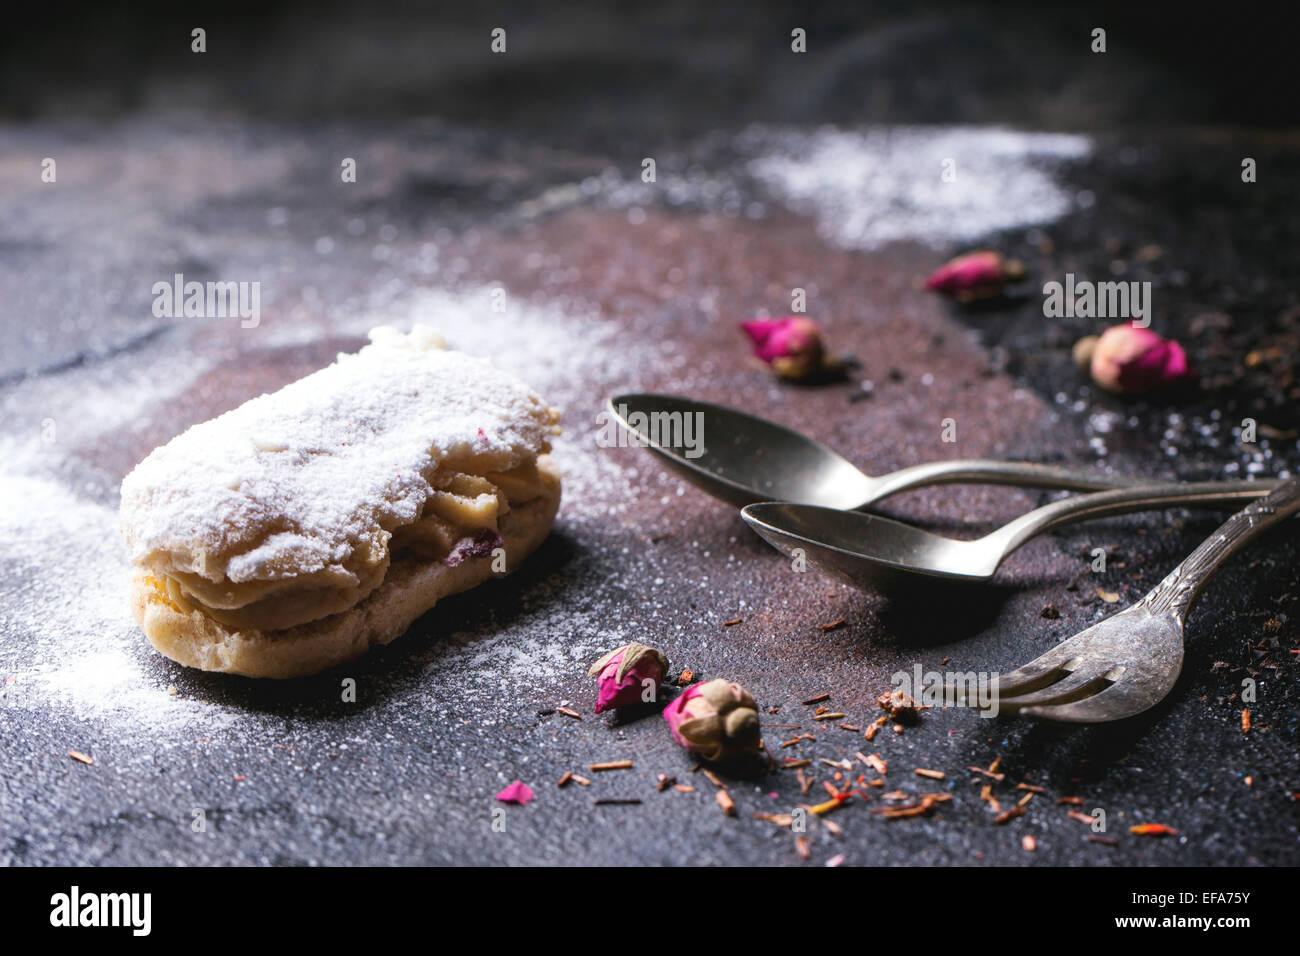 Eclairs with sugar powder, served with dry tea rose buds and vintage cutlery over dark background Stock Photo